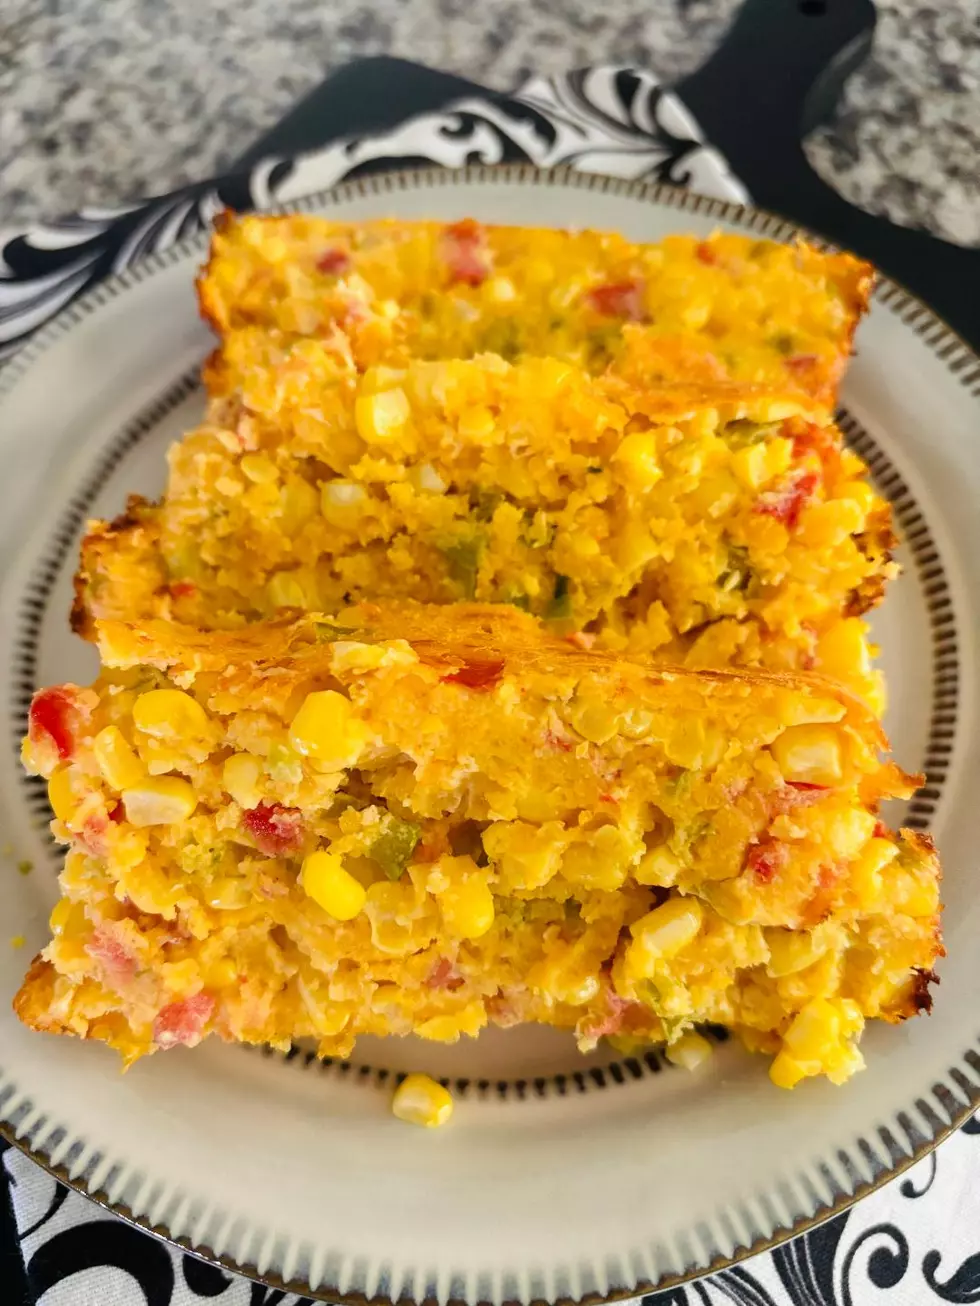 You’ll ‘Die’ Over This Ridiculously Delicious Corn Loaf Recipe